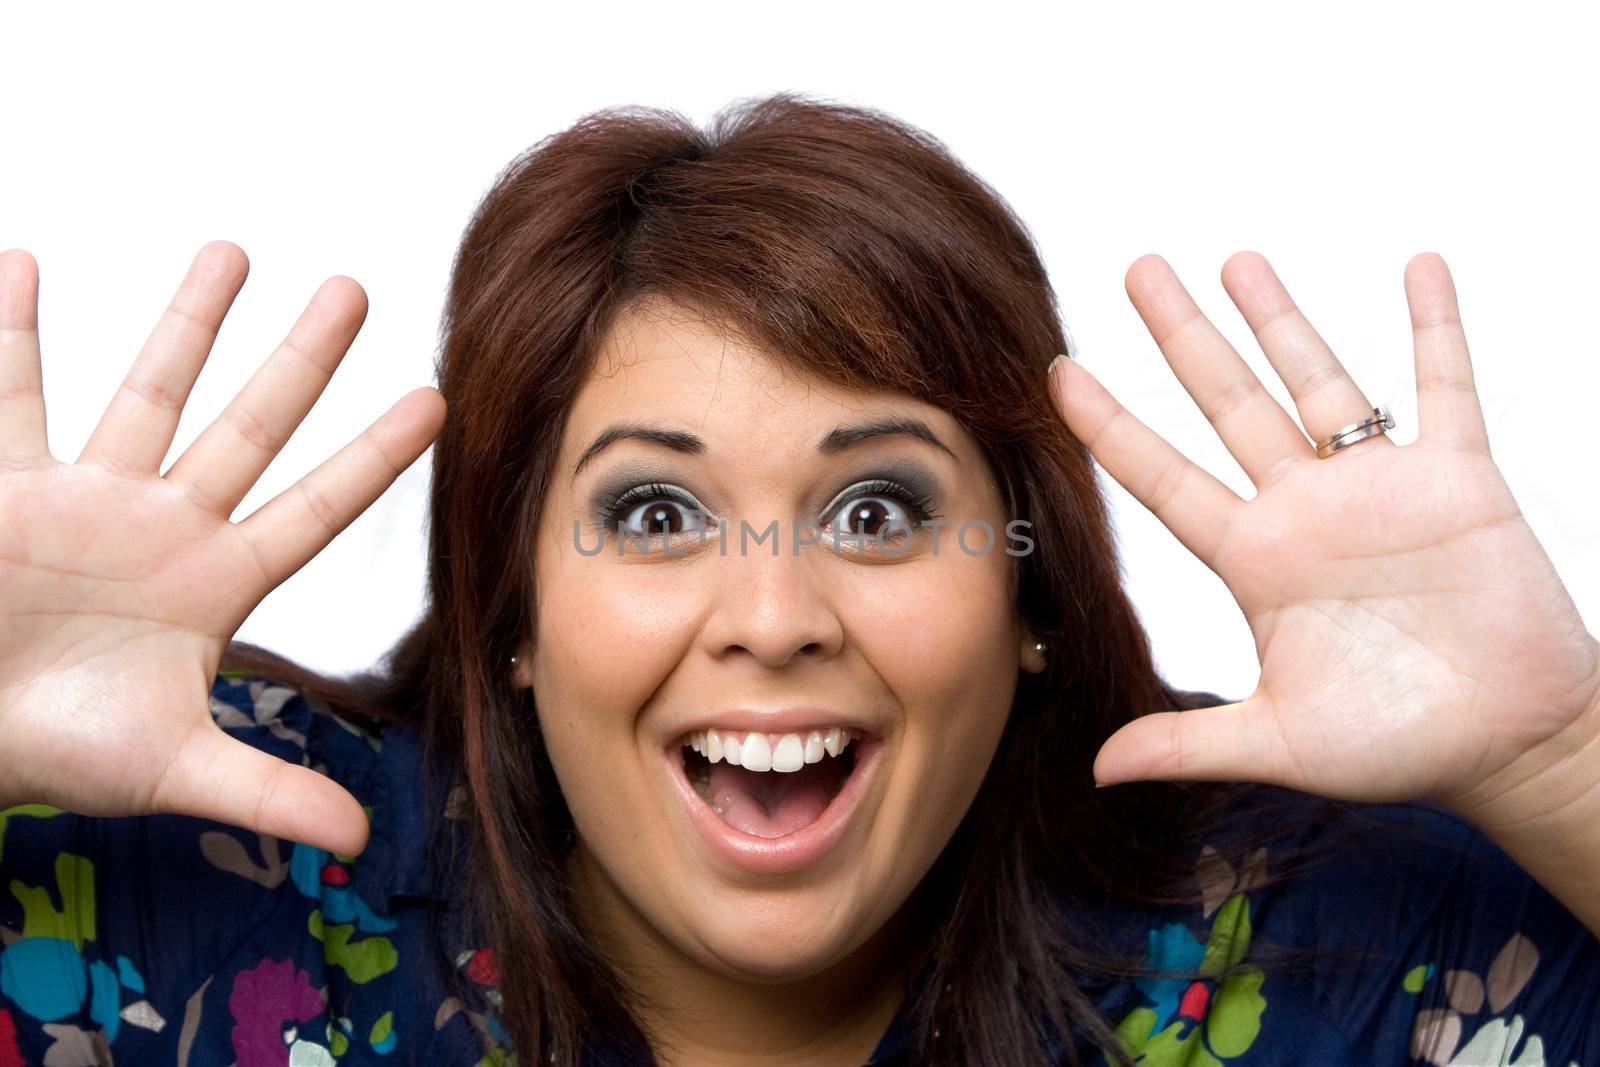 This young hispanic woman looks totally and completely surprised with her hands up in the air.